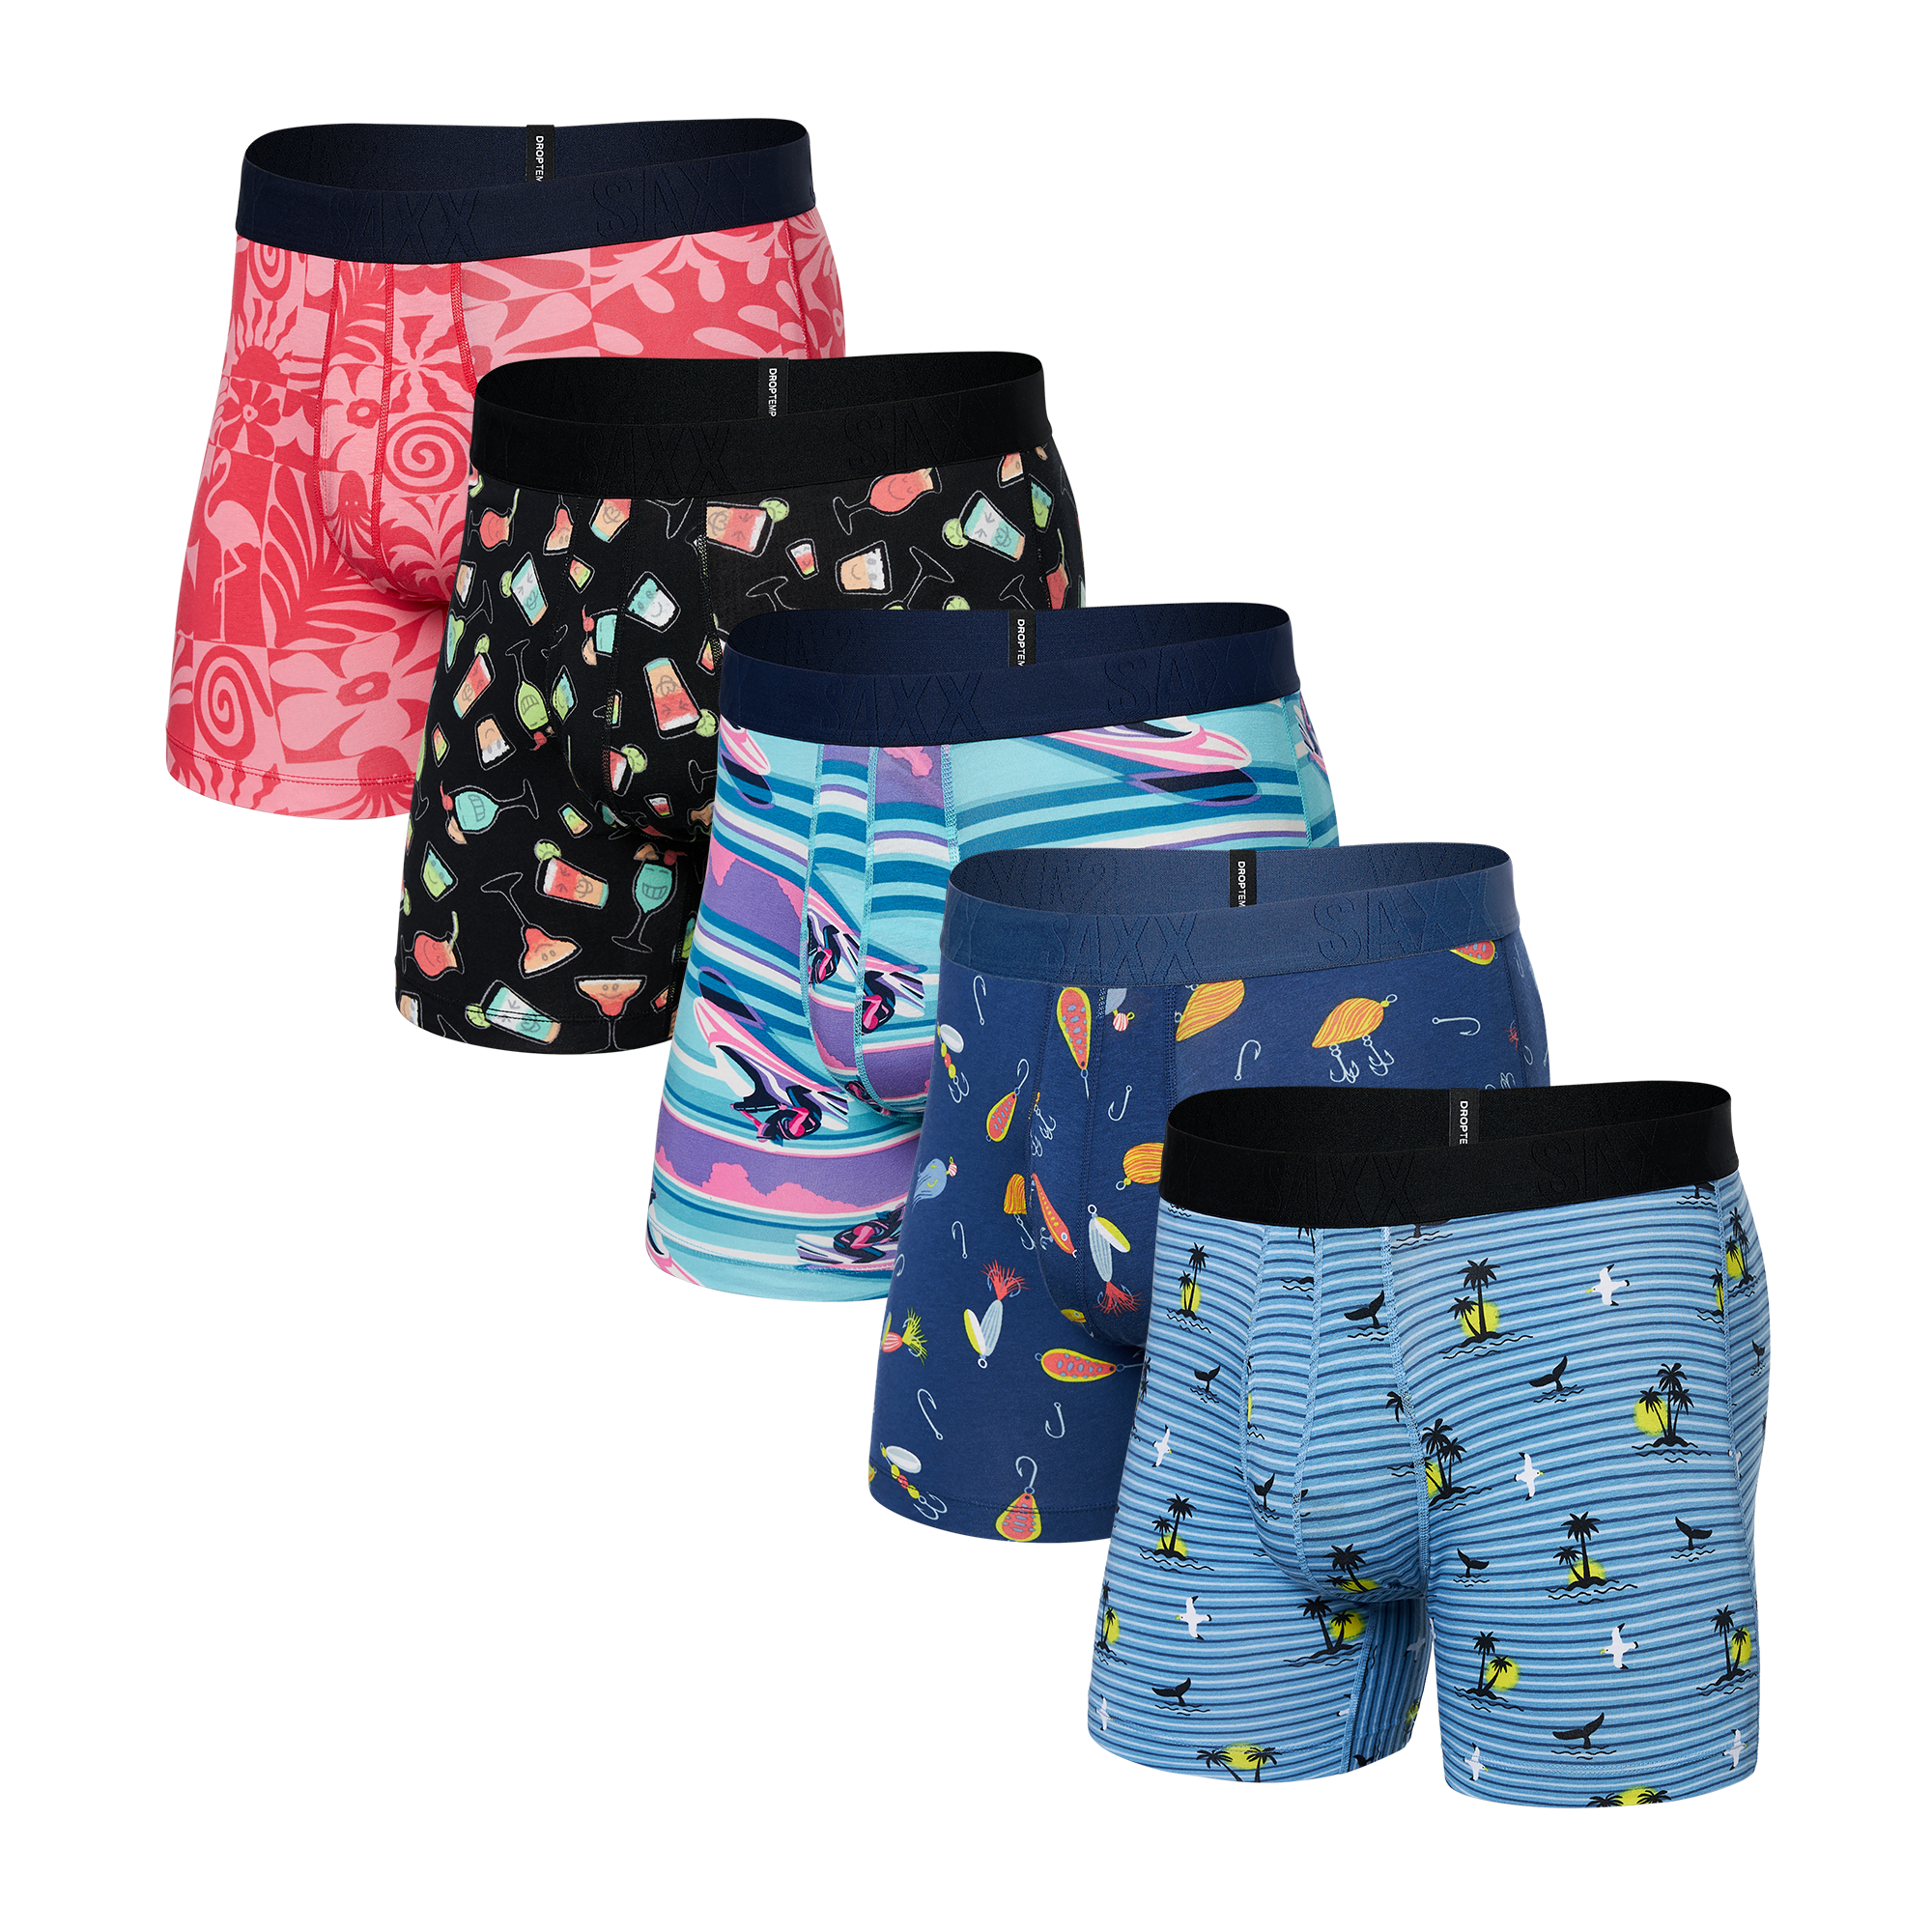 DropTemp Cooling Cotton Boxer Brief 5-Pack in Assorted Prints